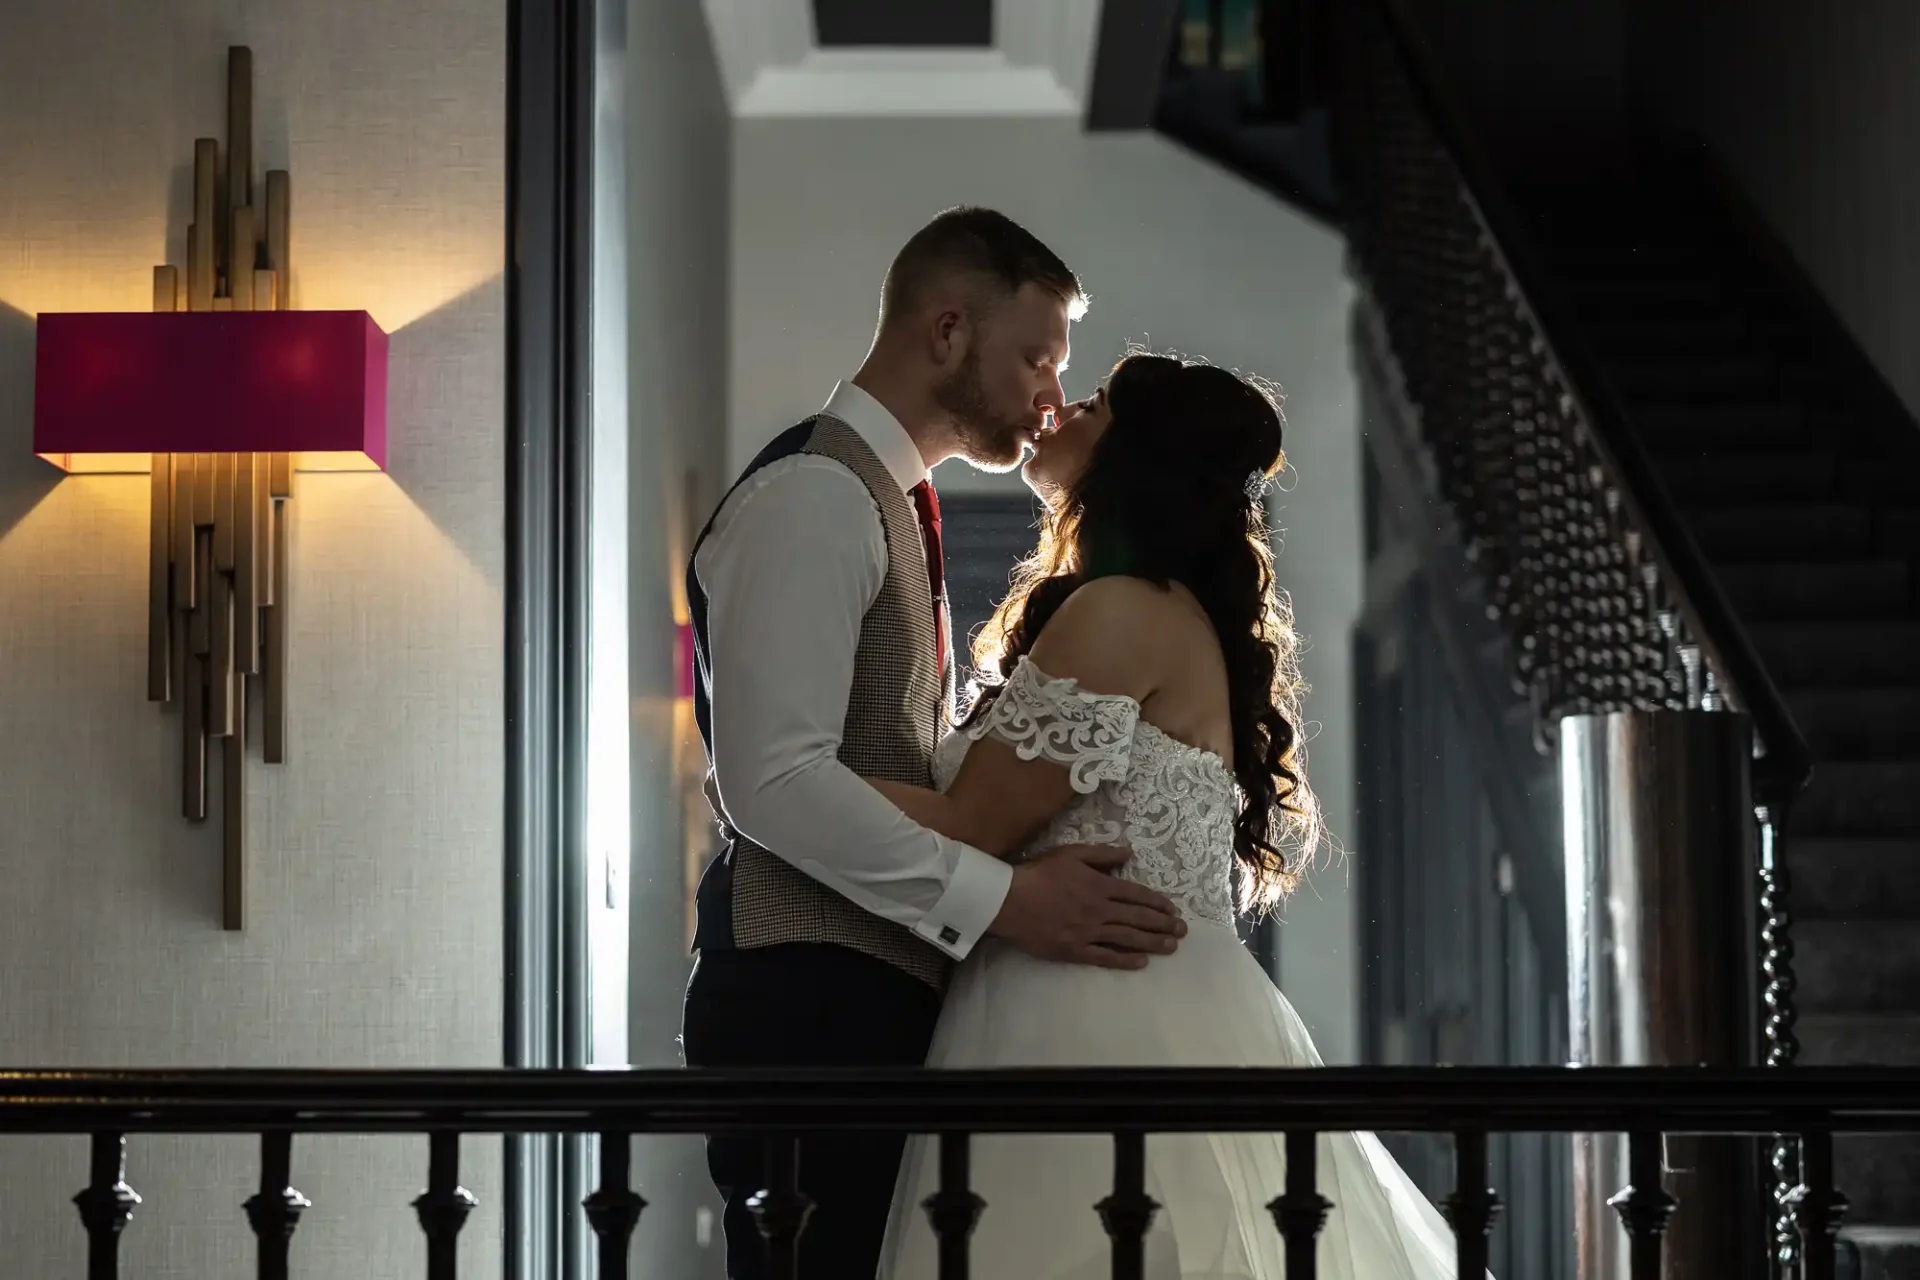 A bride and groom sharing an intimate moment on a balcony, backlit by natural light, with a staircase and lamp in the background.